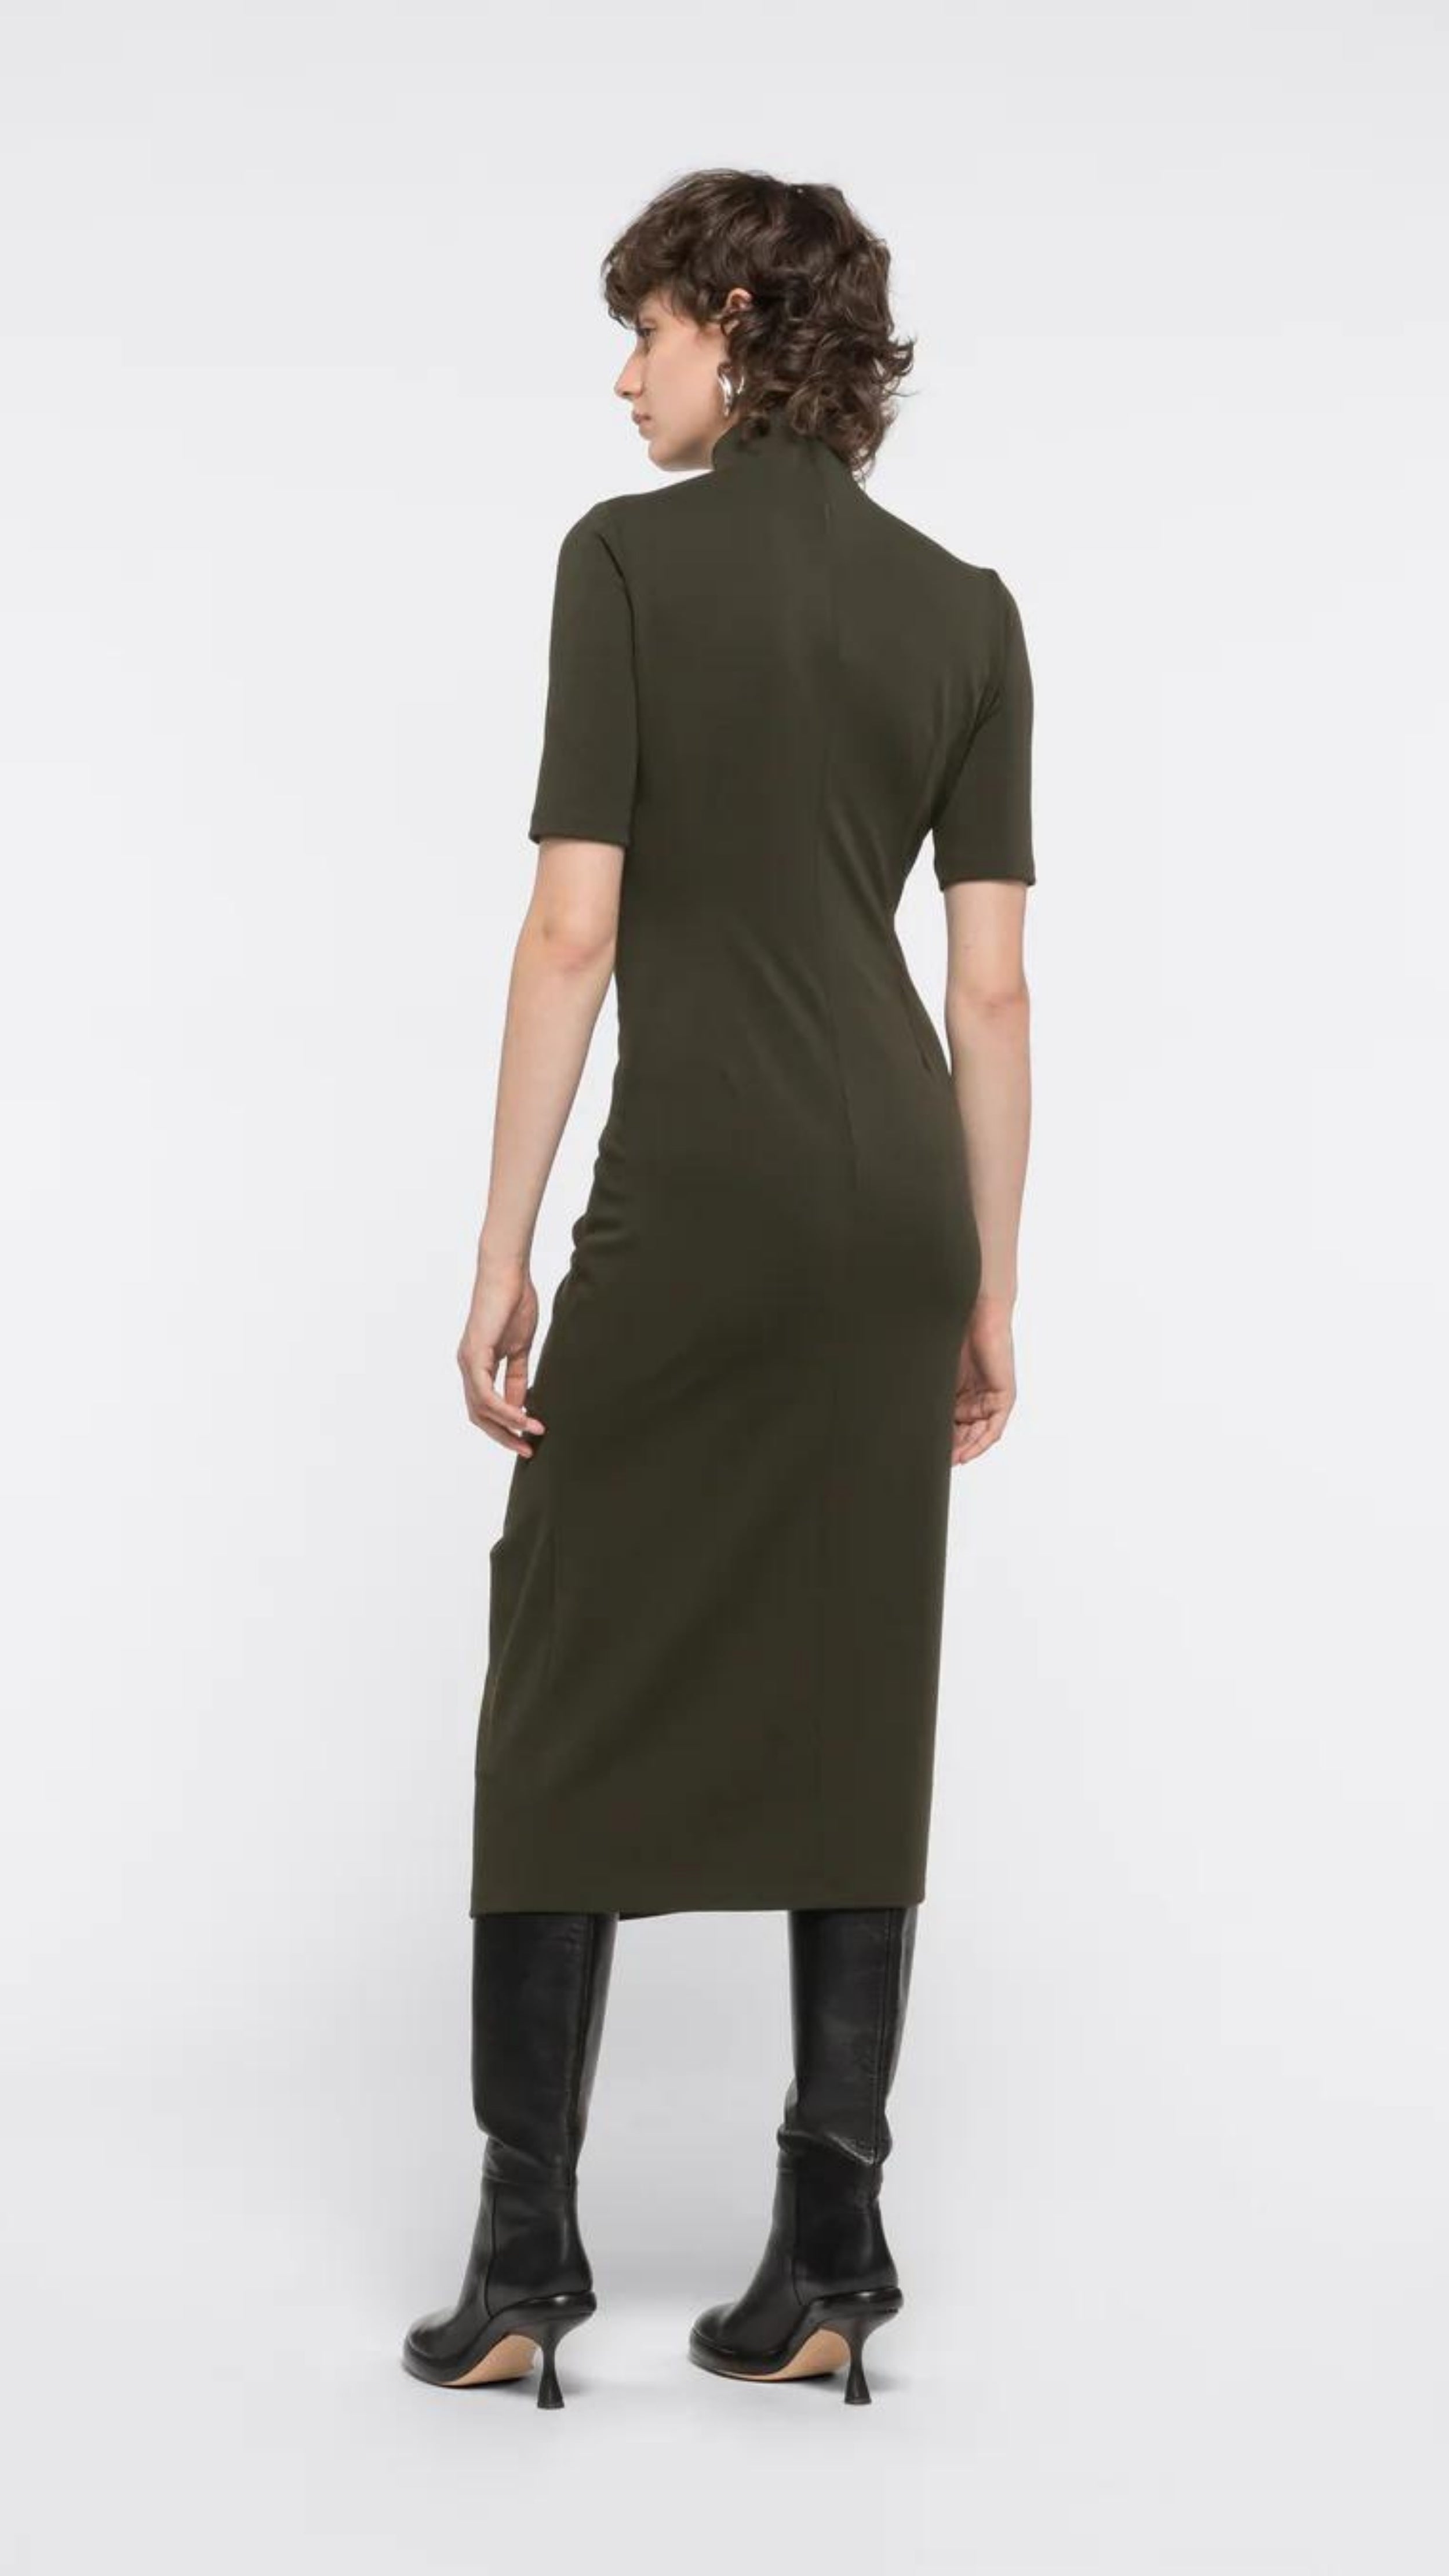 AZ Factory Colville Molly Molloy Lucinda Chambers, Ruffled Turtle Neck Dress A ruffled turtle neck dress. It is fitted with a loose T-neckline, ruffling up the front center and short sleeves. This dress has a midi length hemline.  Shown on model facing the back.